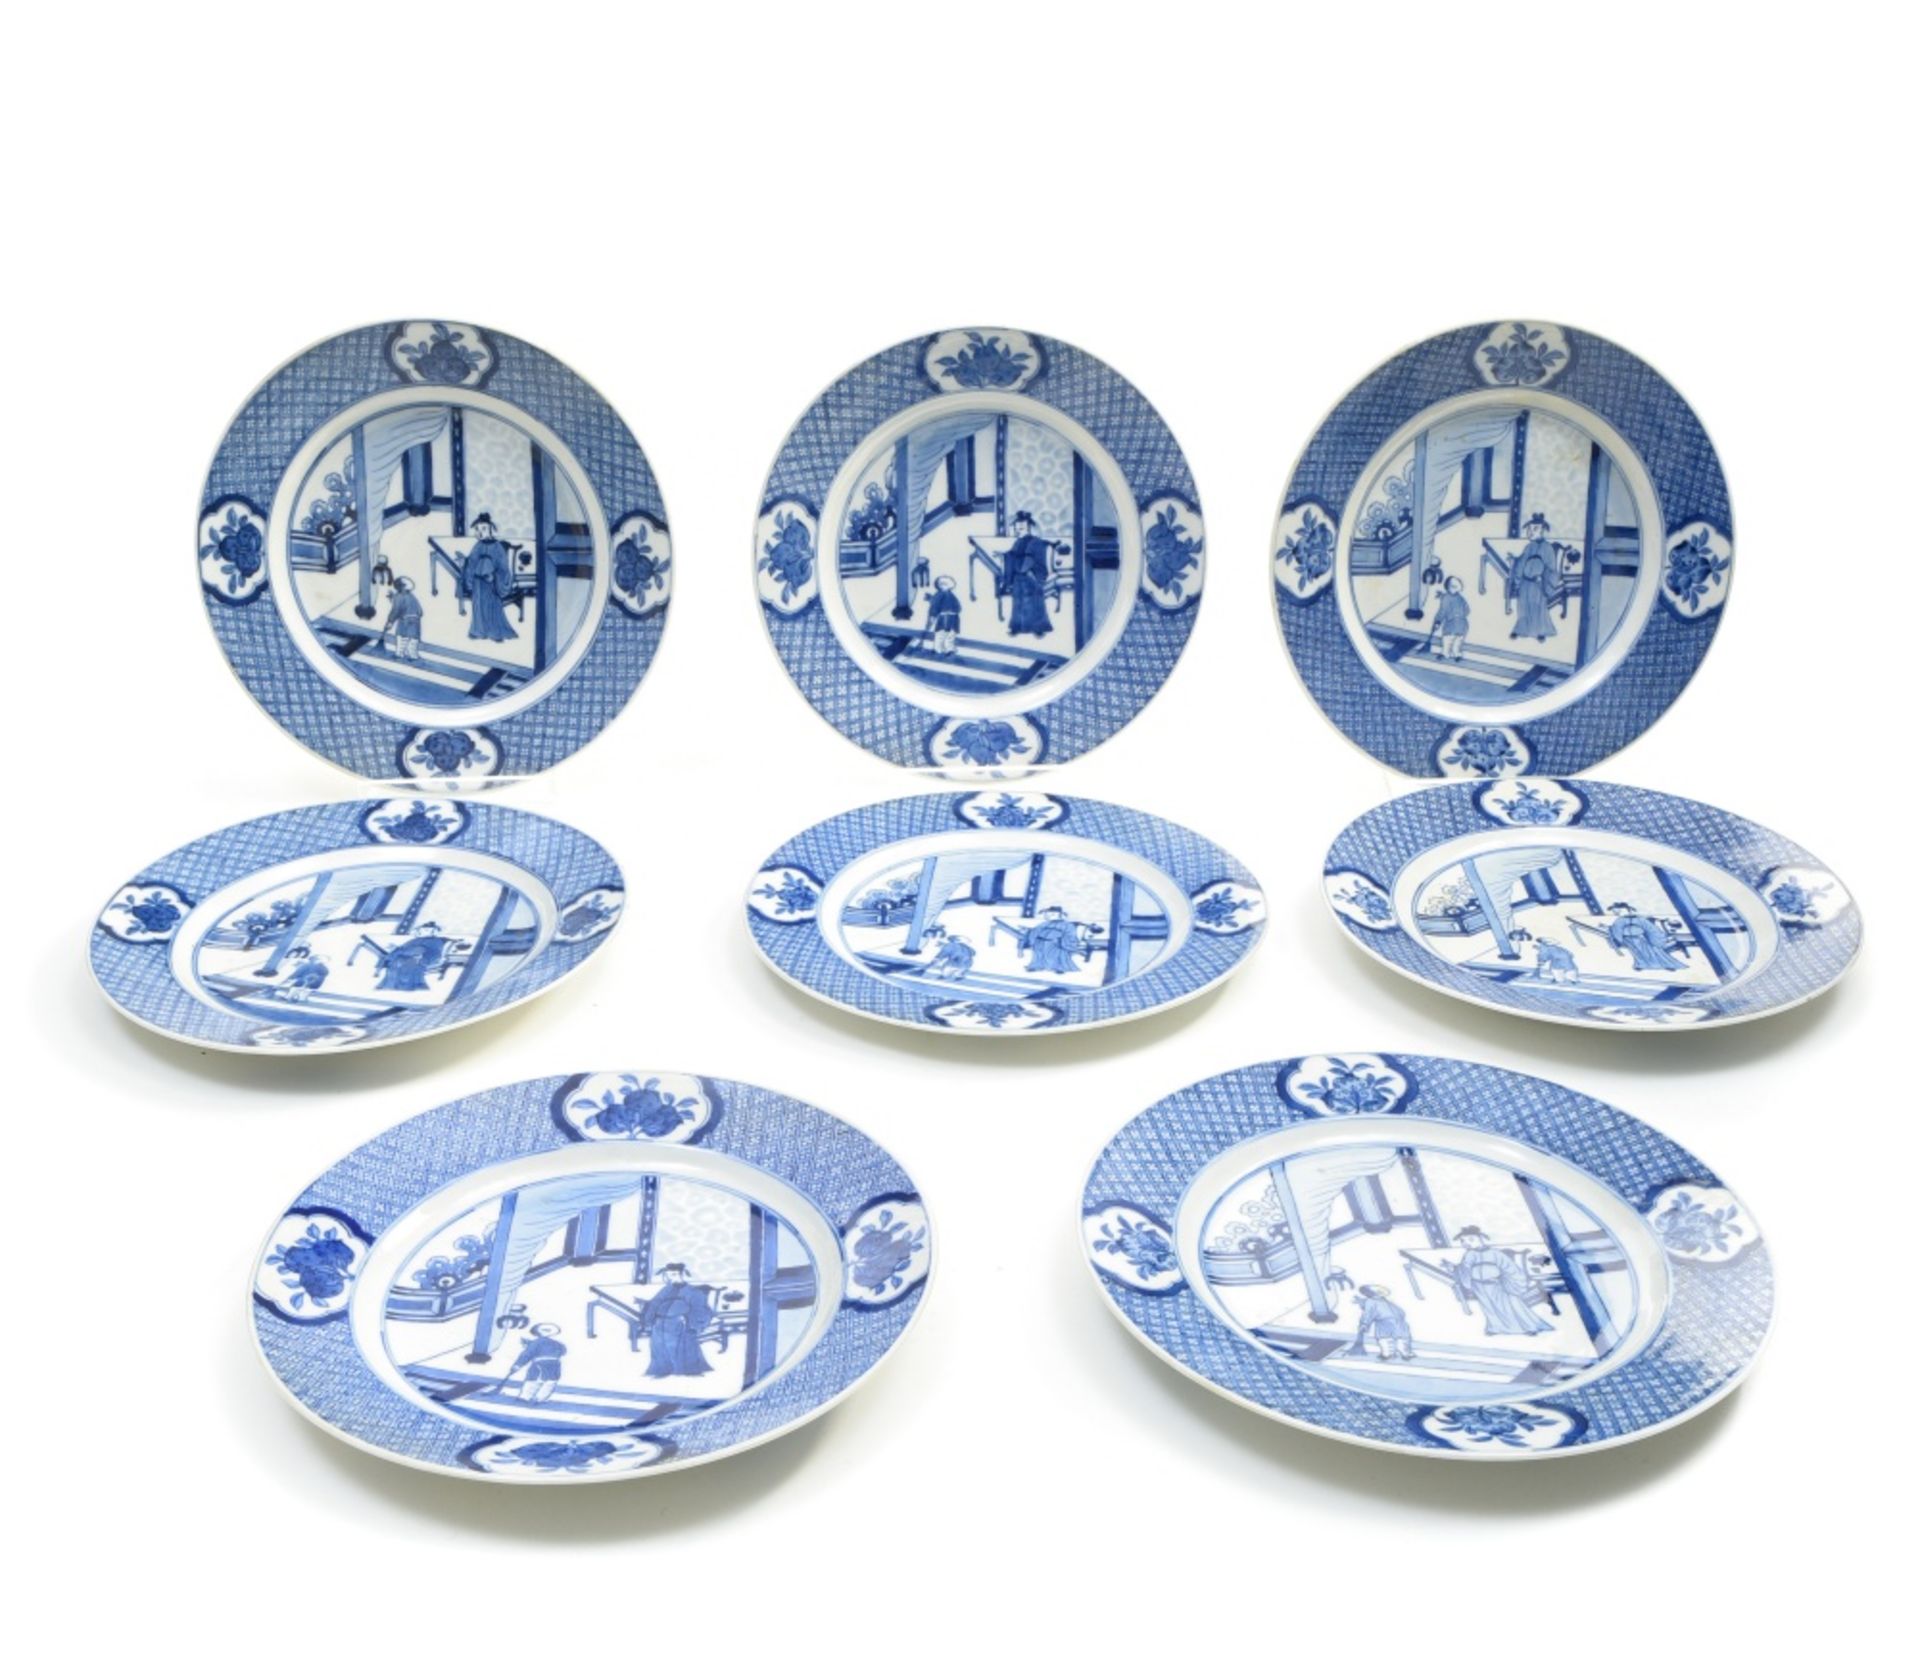 China, 18th-19th century Set of eight plates decorated with a scholar and his apprentice, Blue and